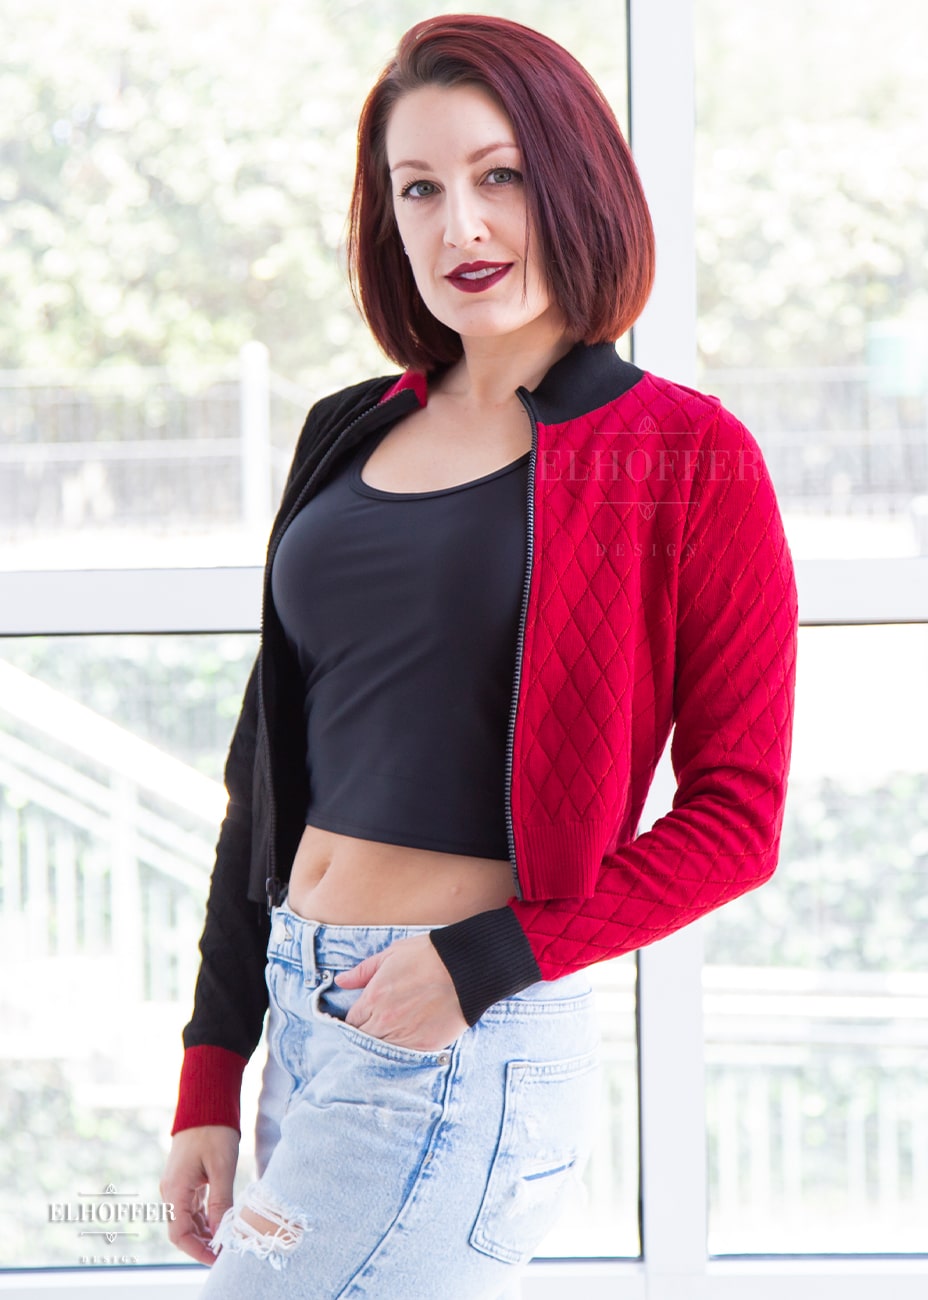 Natalie, a size small fair skinned model with short red hair, is wearing our Kwinn zip up cardigan. It is a zip up cardigan with fitted long sleeves and a high neckline. The knit body has a diamond pattern, one side is black, the other red, with opposite colored cuffs.